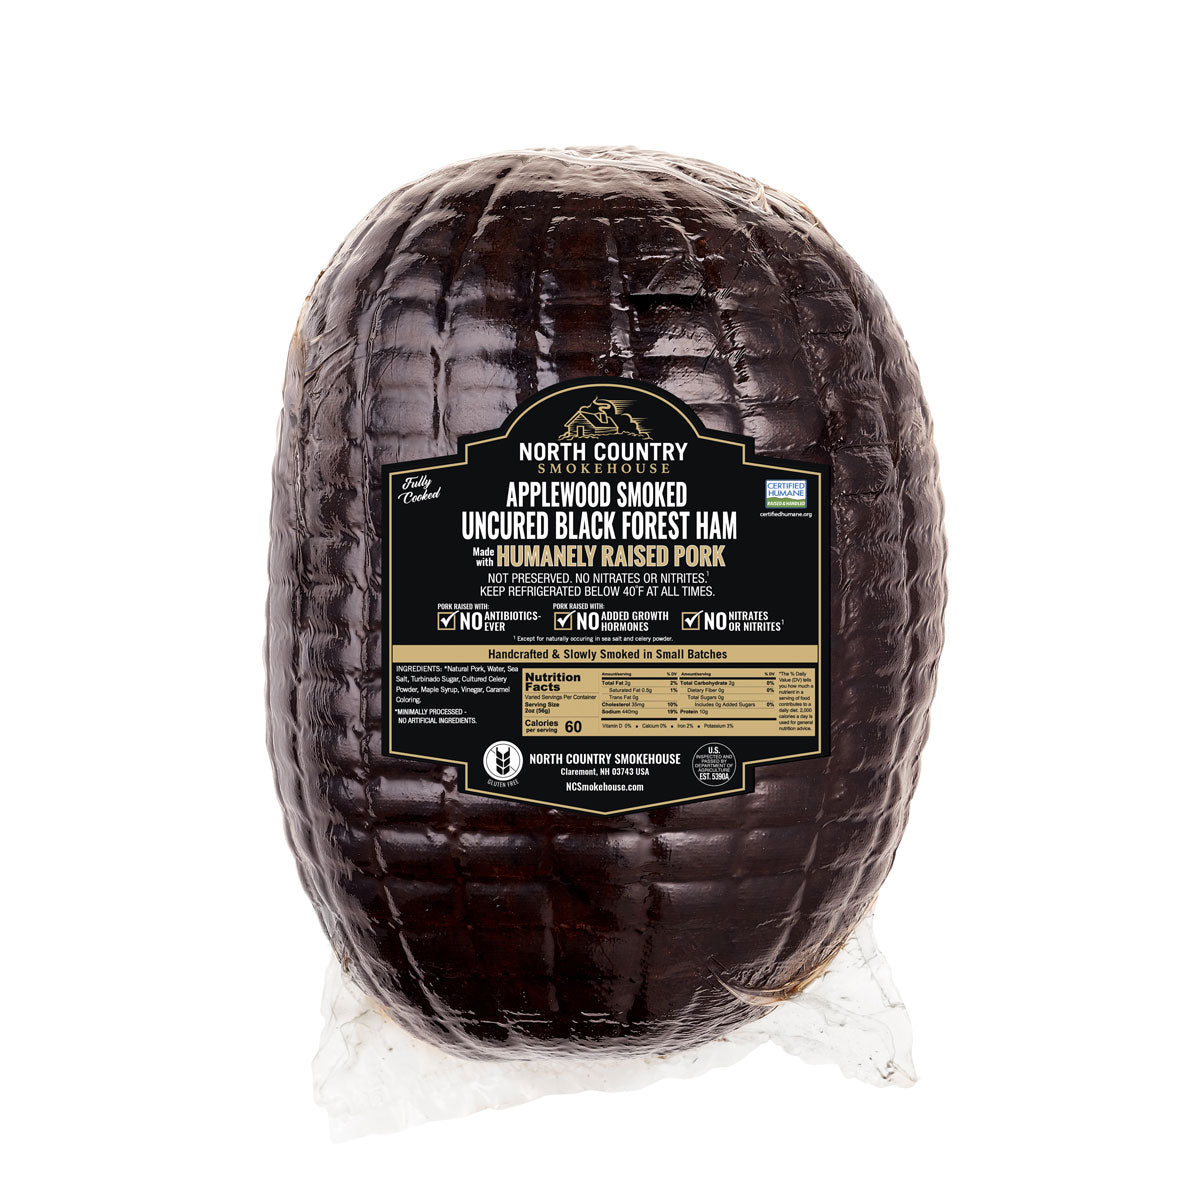 North Country Smokehouse ABF Black Forest Smoked Ham